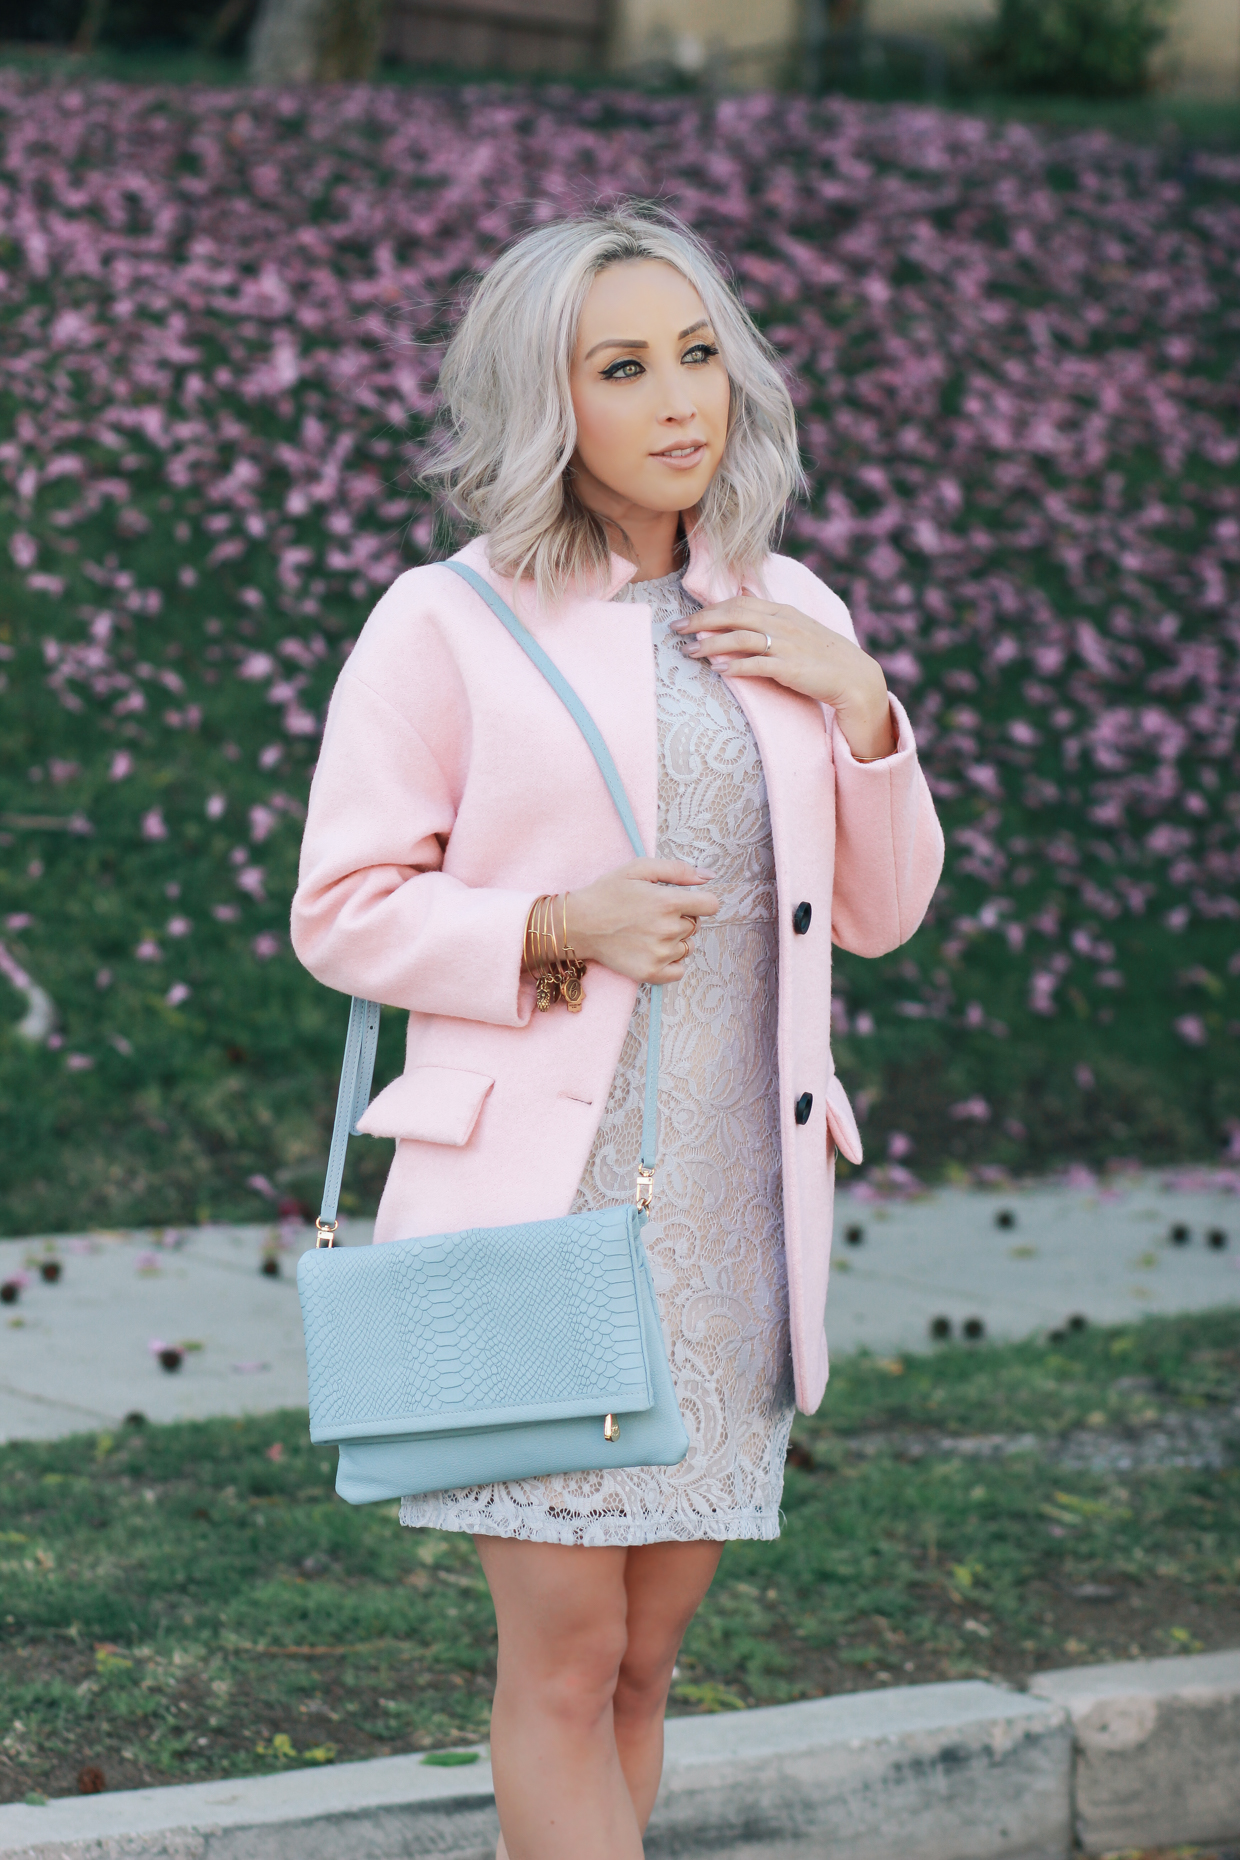 Blondie in the City | Pastel Spring Outfit | Blue Lace Dress, Pink Coat, Christian Louboutin's, & Reversible Python Clutch by @giginewyork